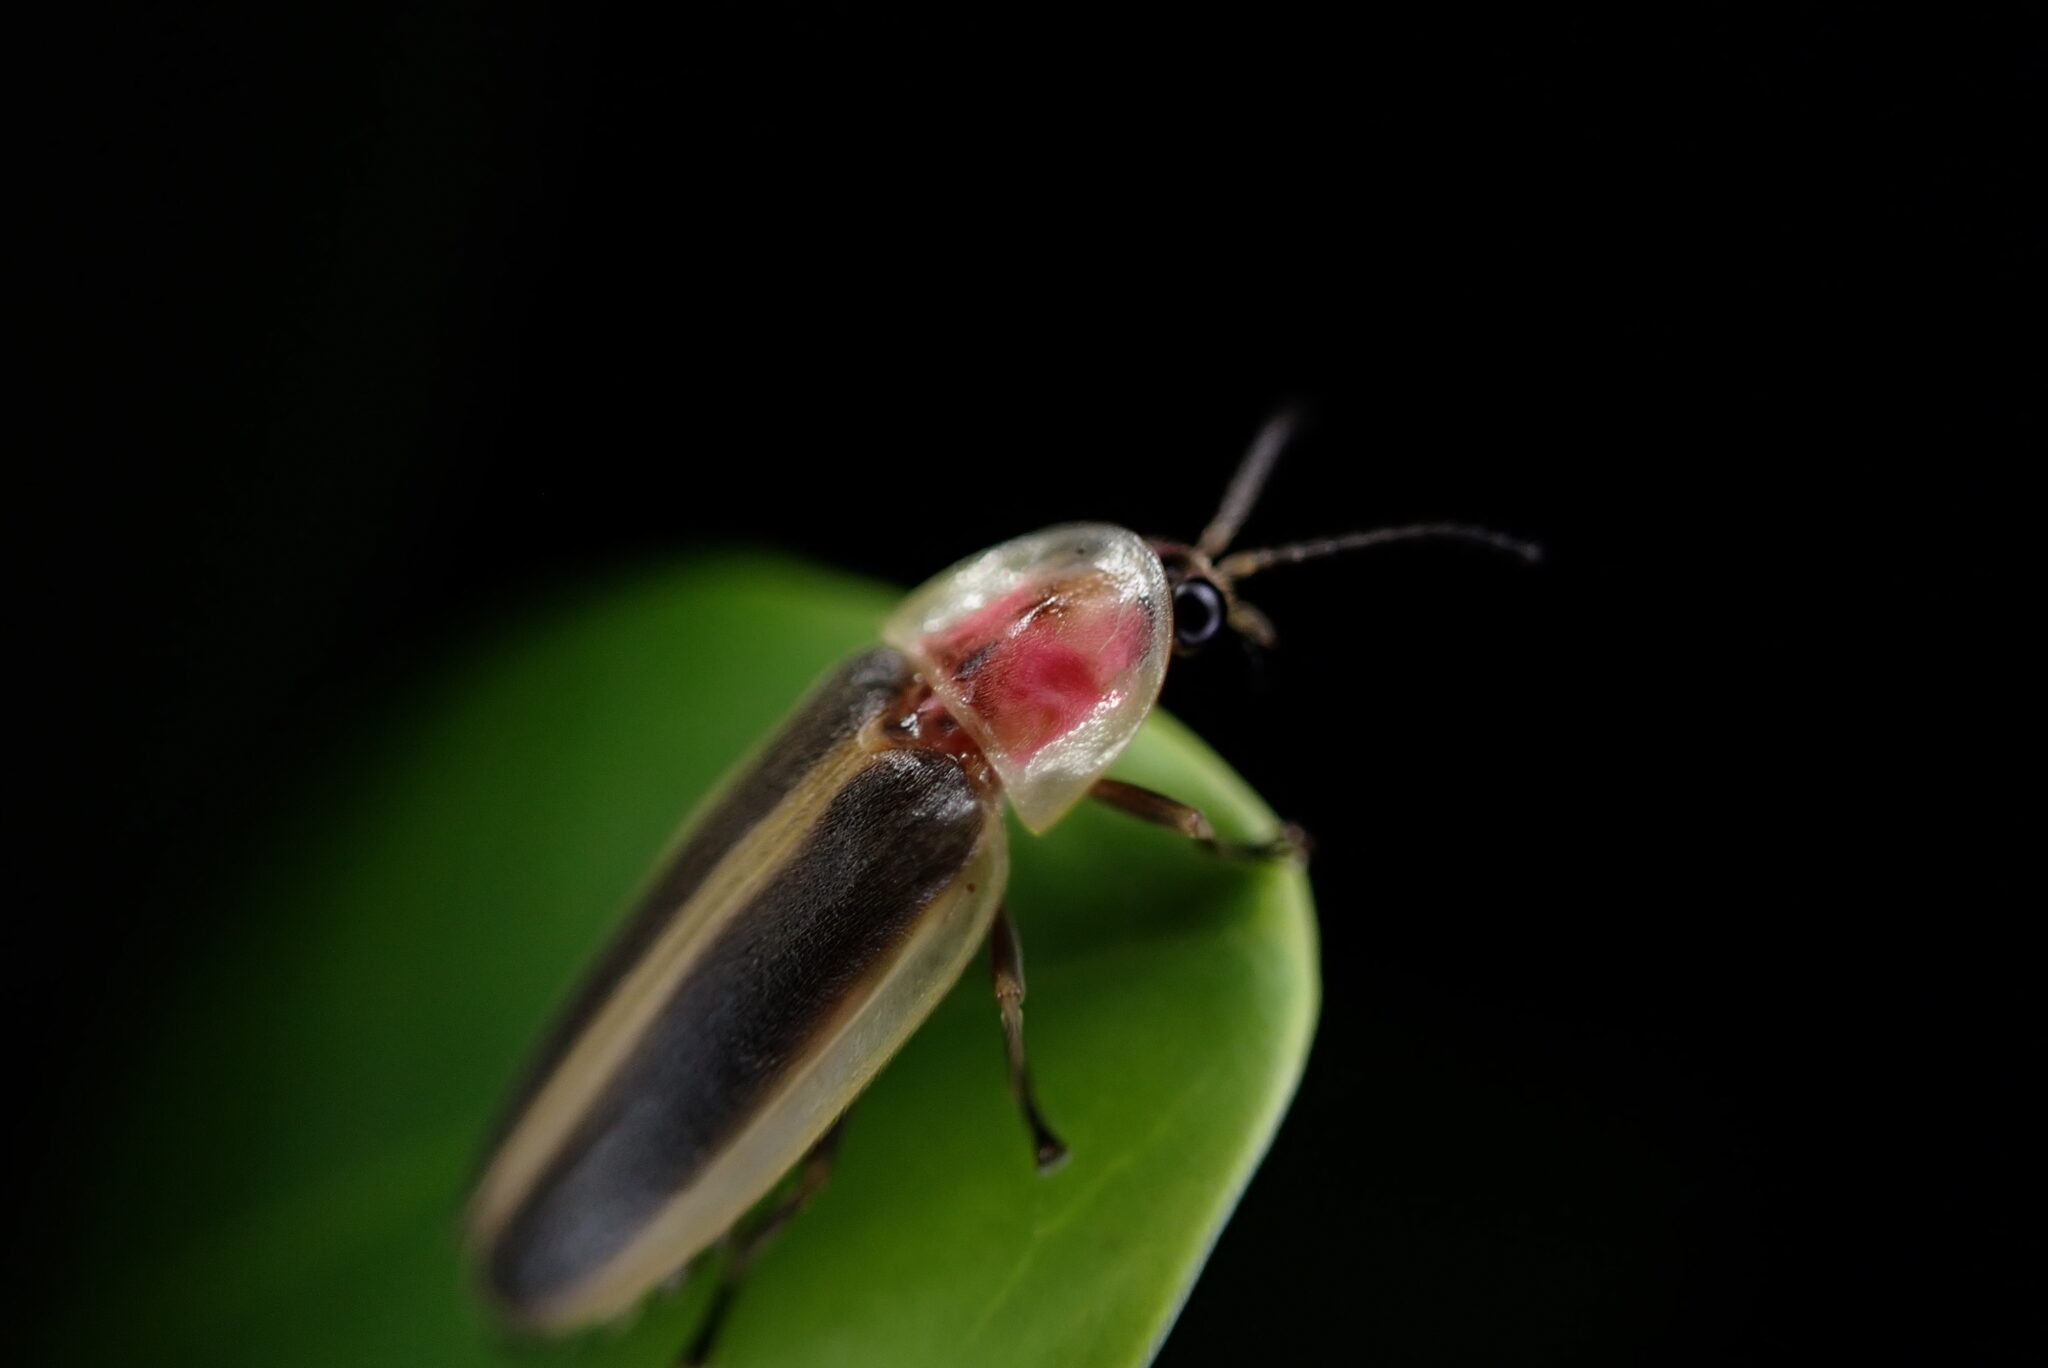 A firefly perches on a leaf, surrounded by darkness.